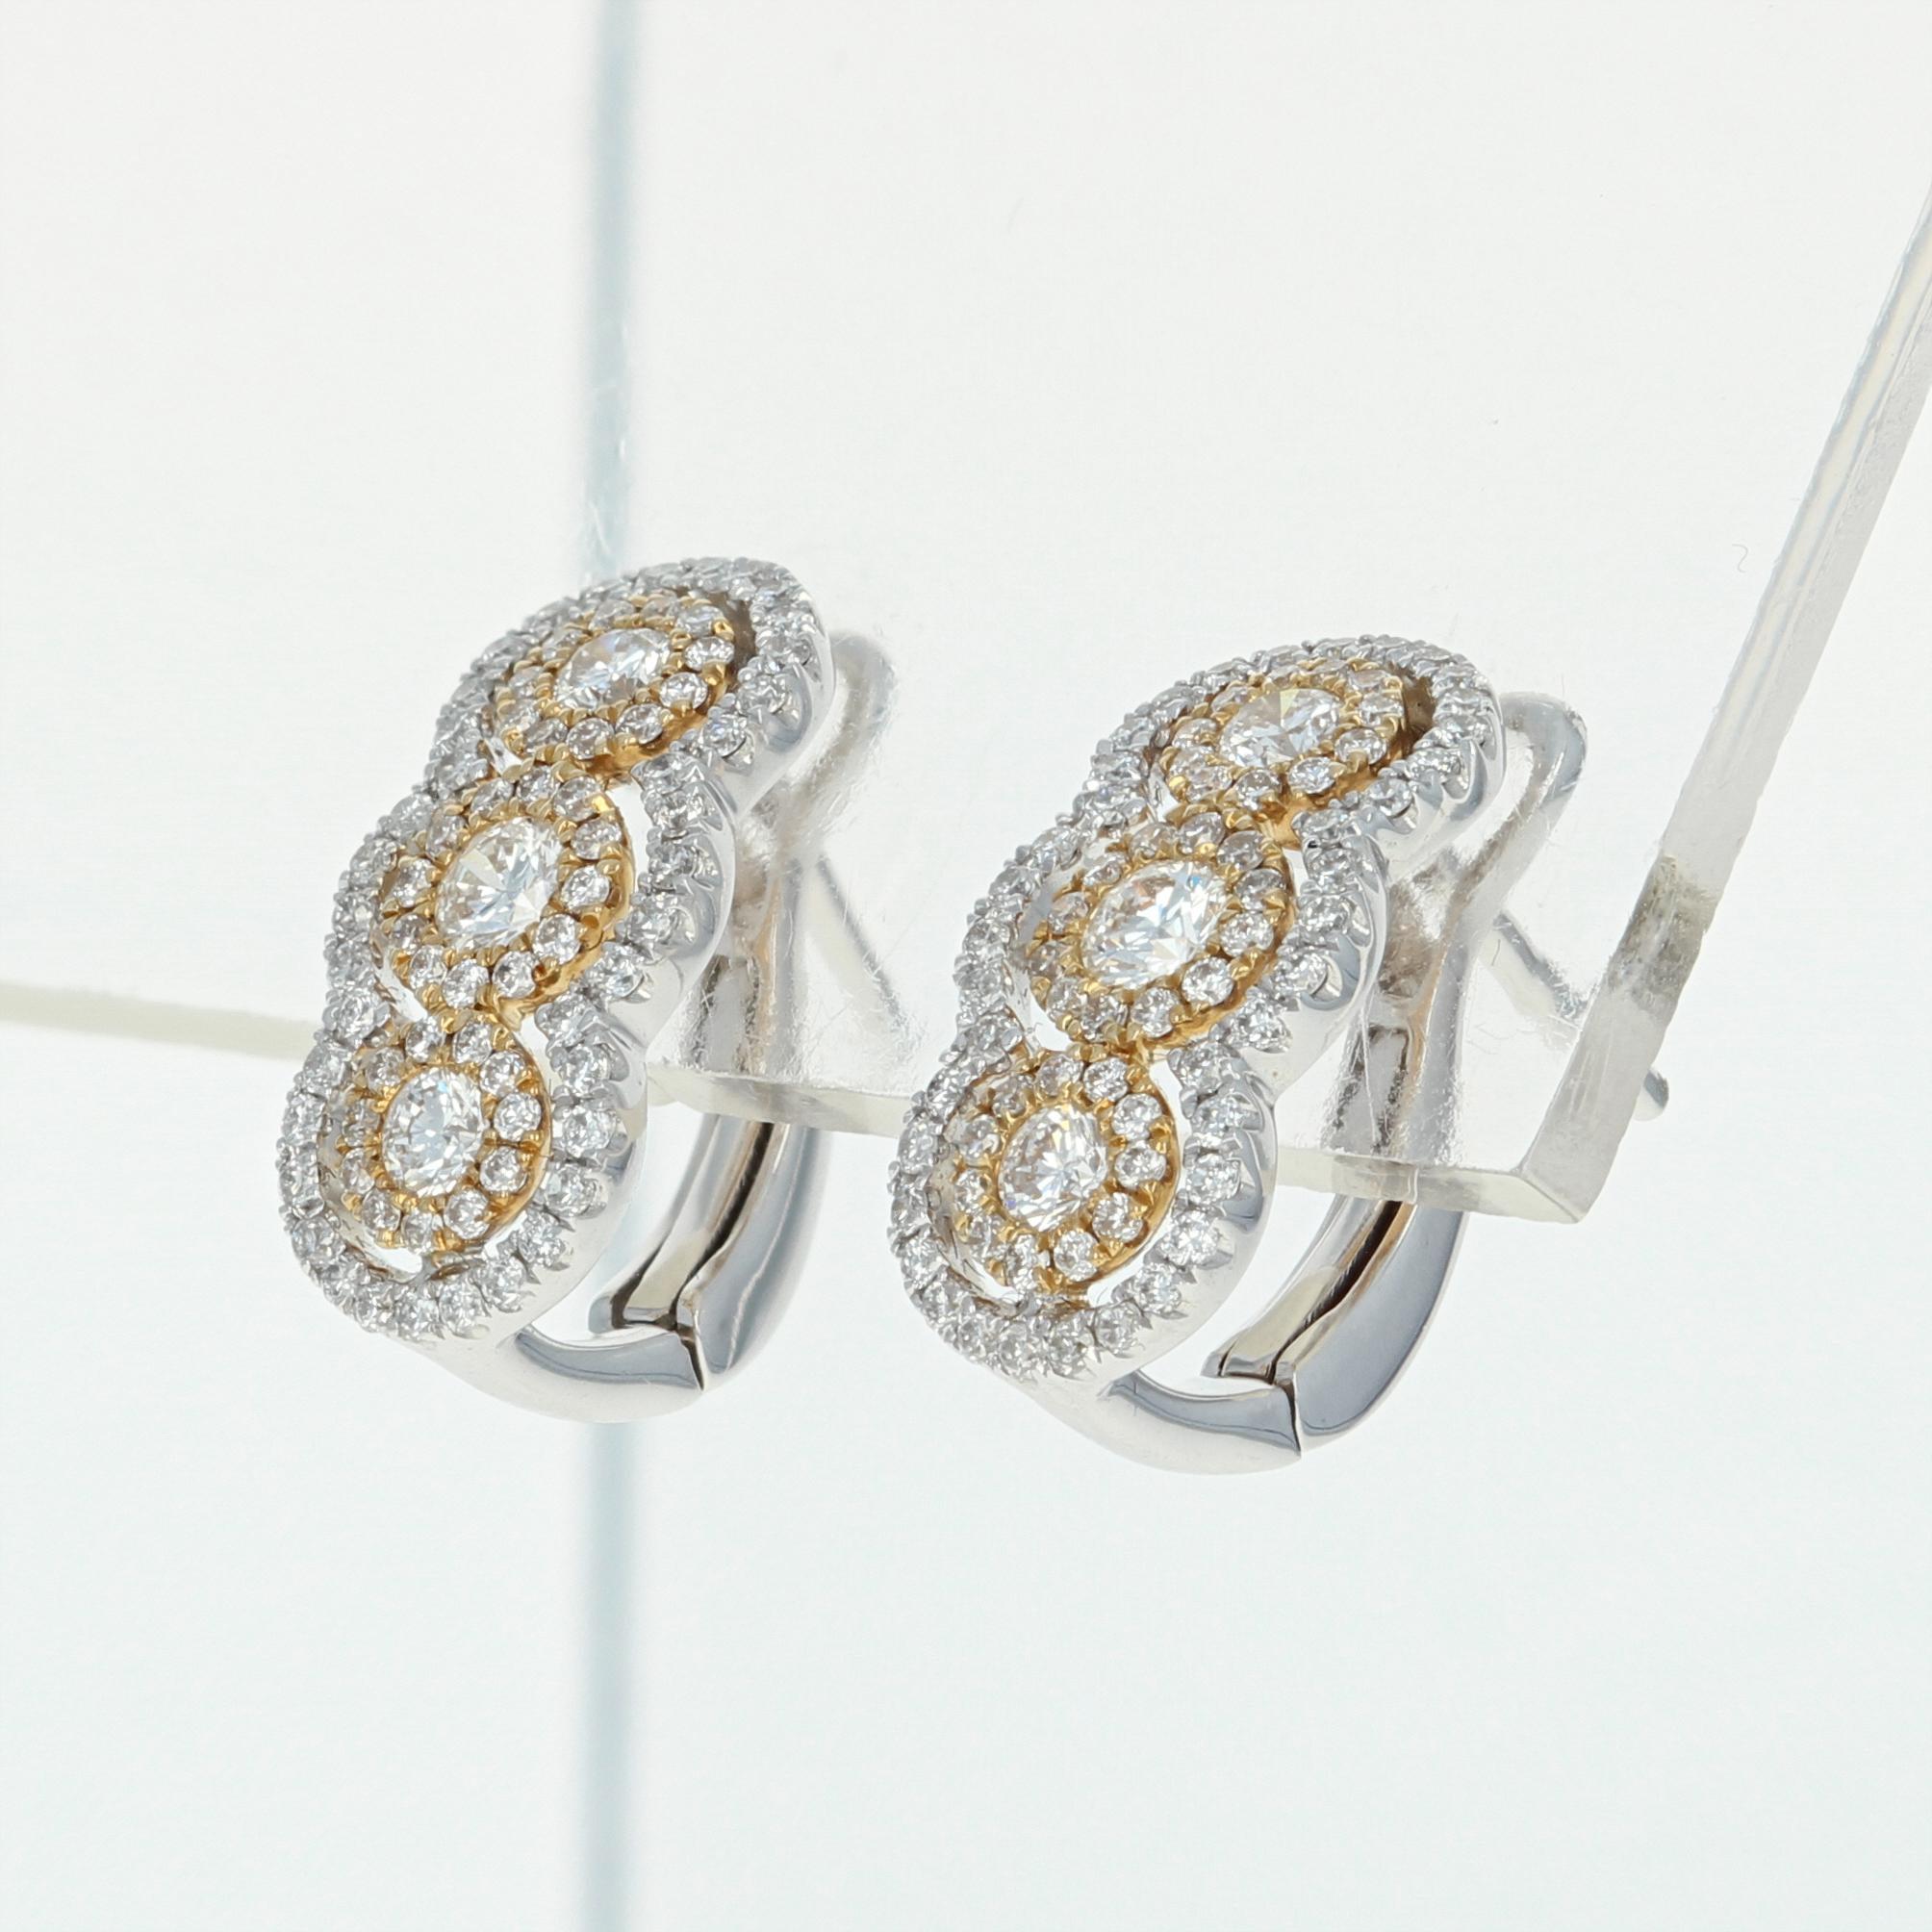 With the radiant gift of diamonds, you say it all without saying a word! Exquisitely crafted in 14k white and yellow gold, this NEW pair of curved J-hoop earrings feature three sparkling diamonds which are each encircled by diamond haloes and